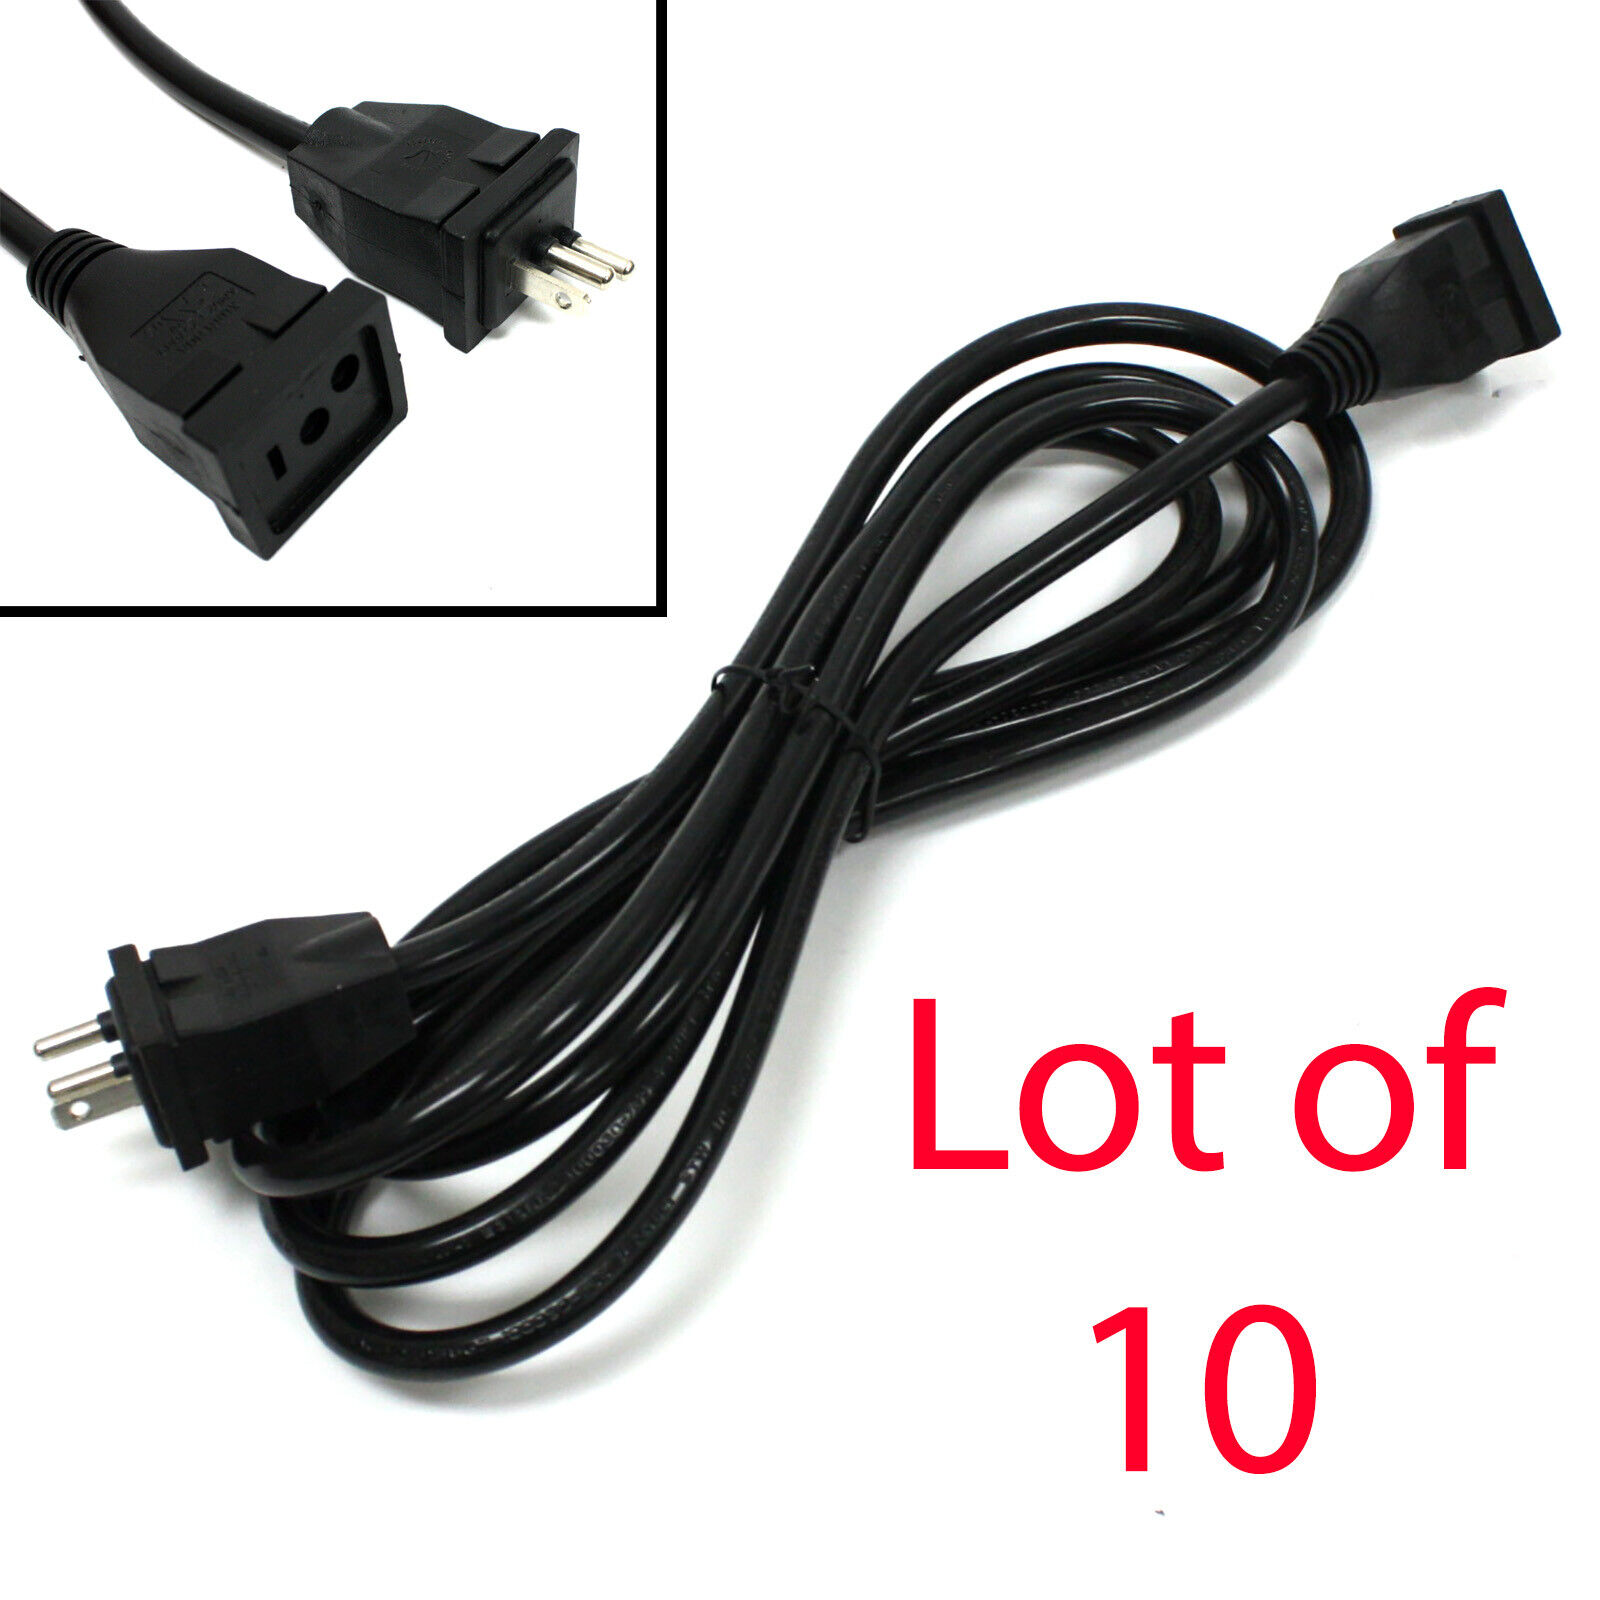 Lot 10 - 10 Ft / 3M Extension Cord Ballast Reflector Power Grow Light Lamp Cable